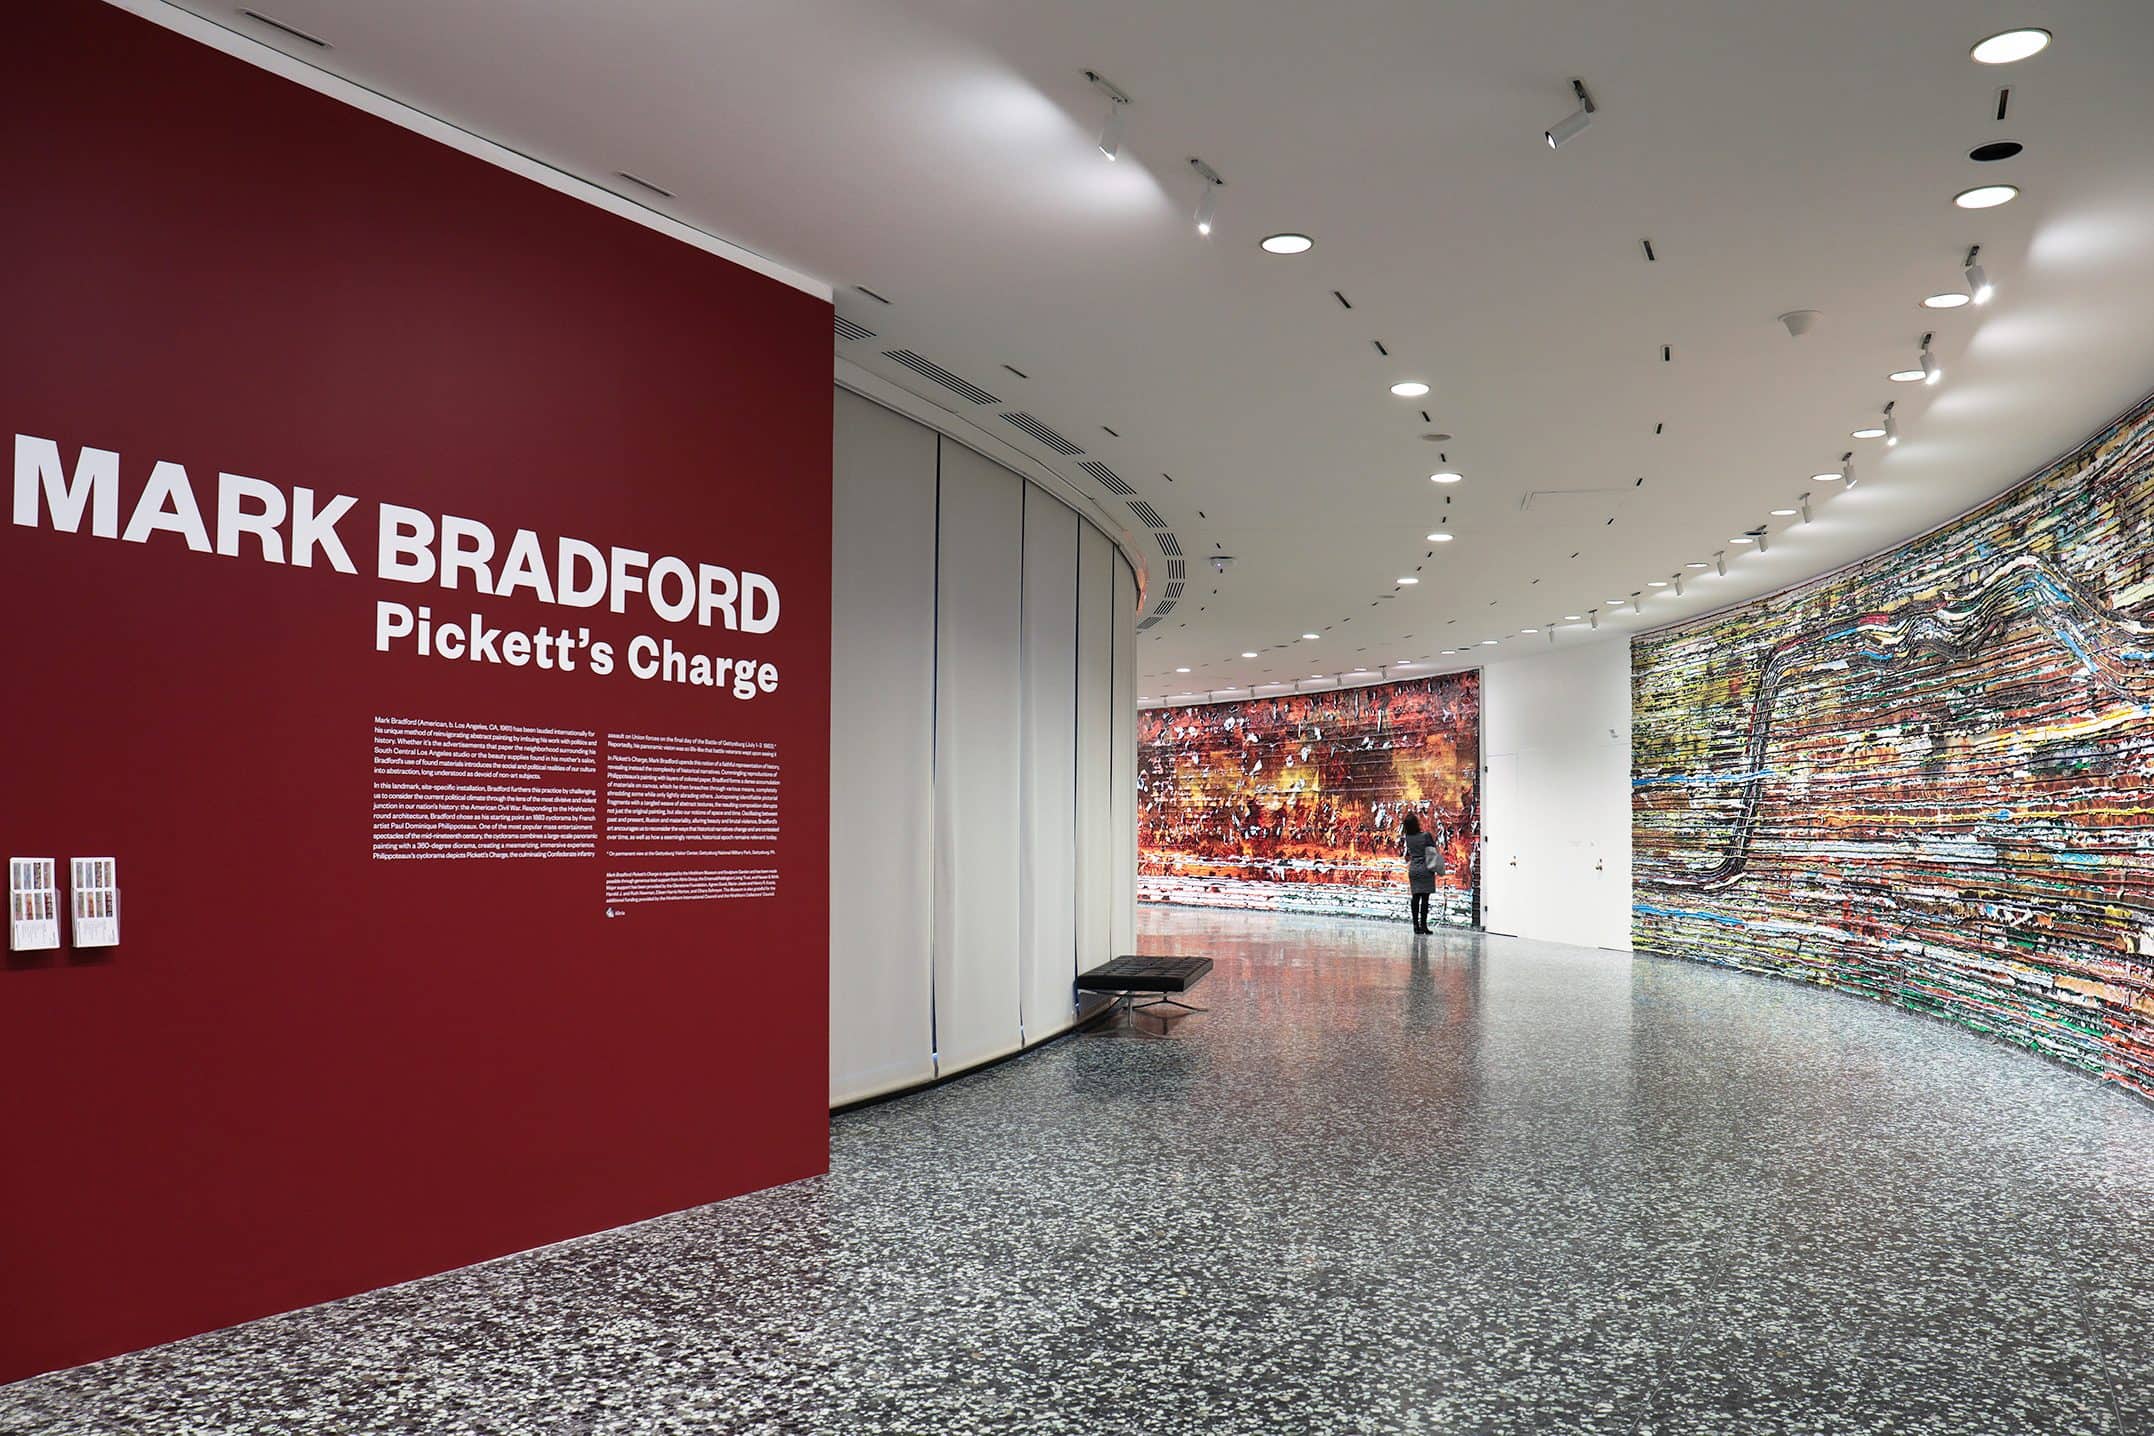 Mark Bradford’s Pickett’s Charge at Hirshhorn Museum and Sculpture Garden